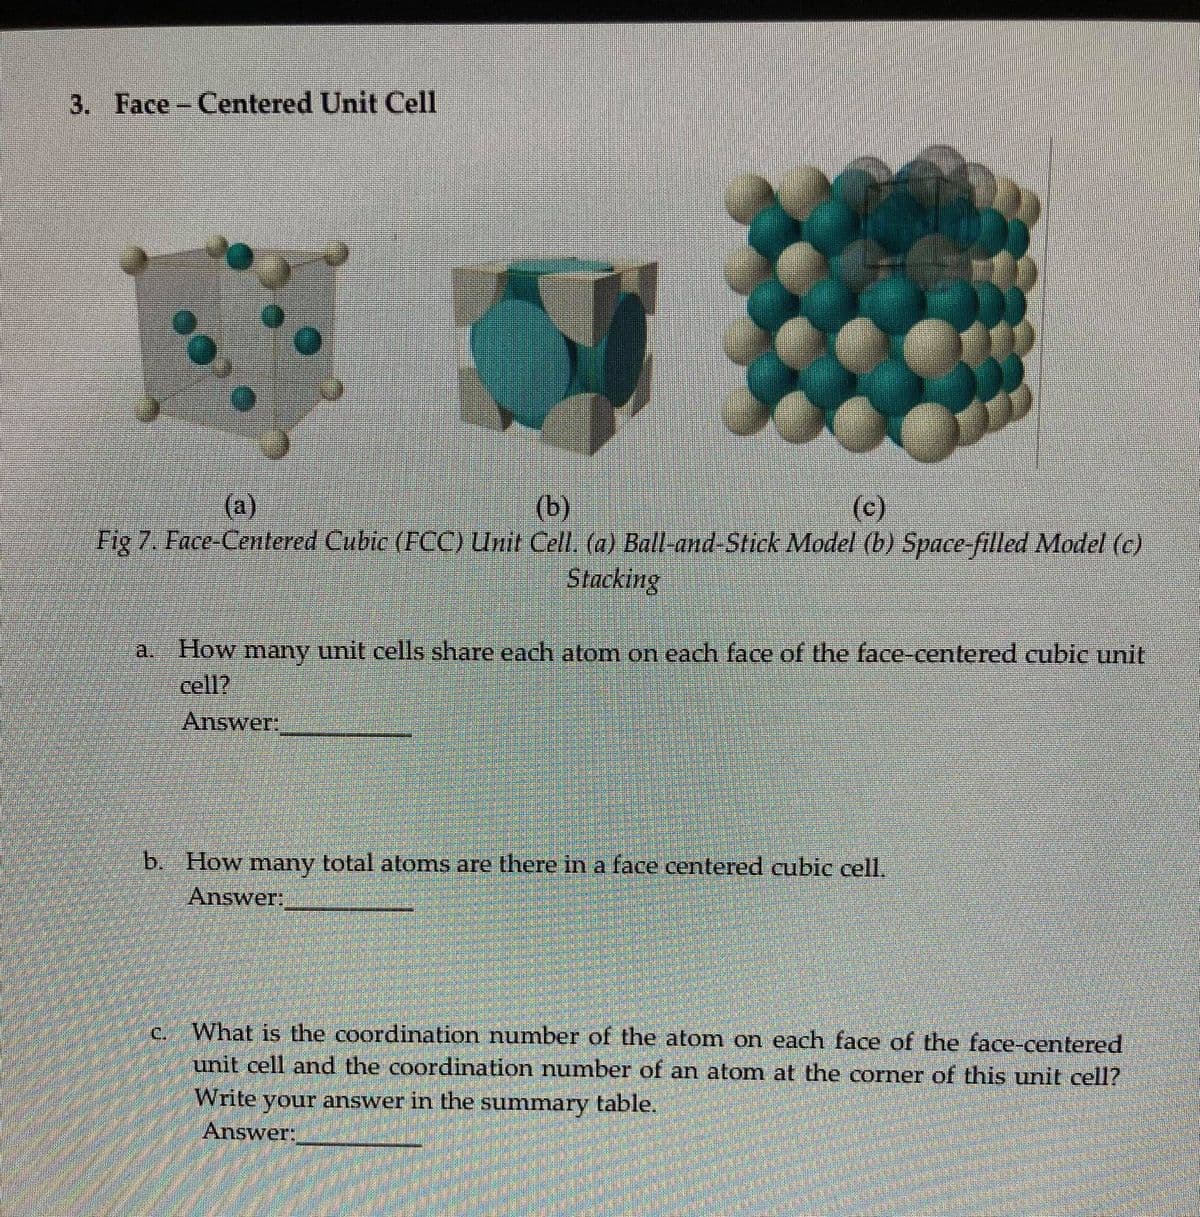 3. Face- Centered Unit Cell
(b)
Fig 7. Face-Centered Cubic (FCC) Unit Cell. (a) Ball-and-Stick Model (b) Space-filled Model (c)
Stacking
(a)
(c)
a. How many unit cells share each atom on each face of the face-centered cubic unit
cell?
Answer
b. How many total atoms are there in a face centered cubie cell.
Answer,
What is the coordination number of the atom on each face of the face-centered
unit cell and the coordination number of an atom at the corner of this unit cell?
C.
Write your answer in the summary table.
Answer:
